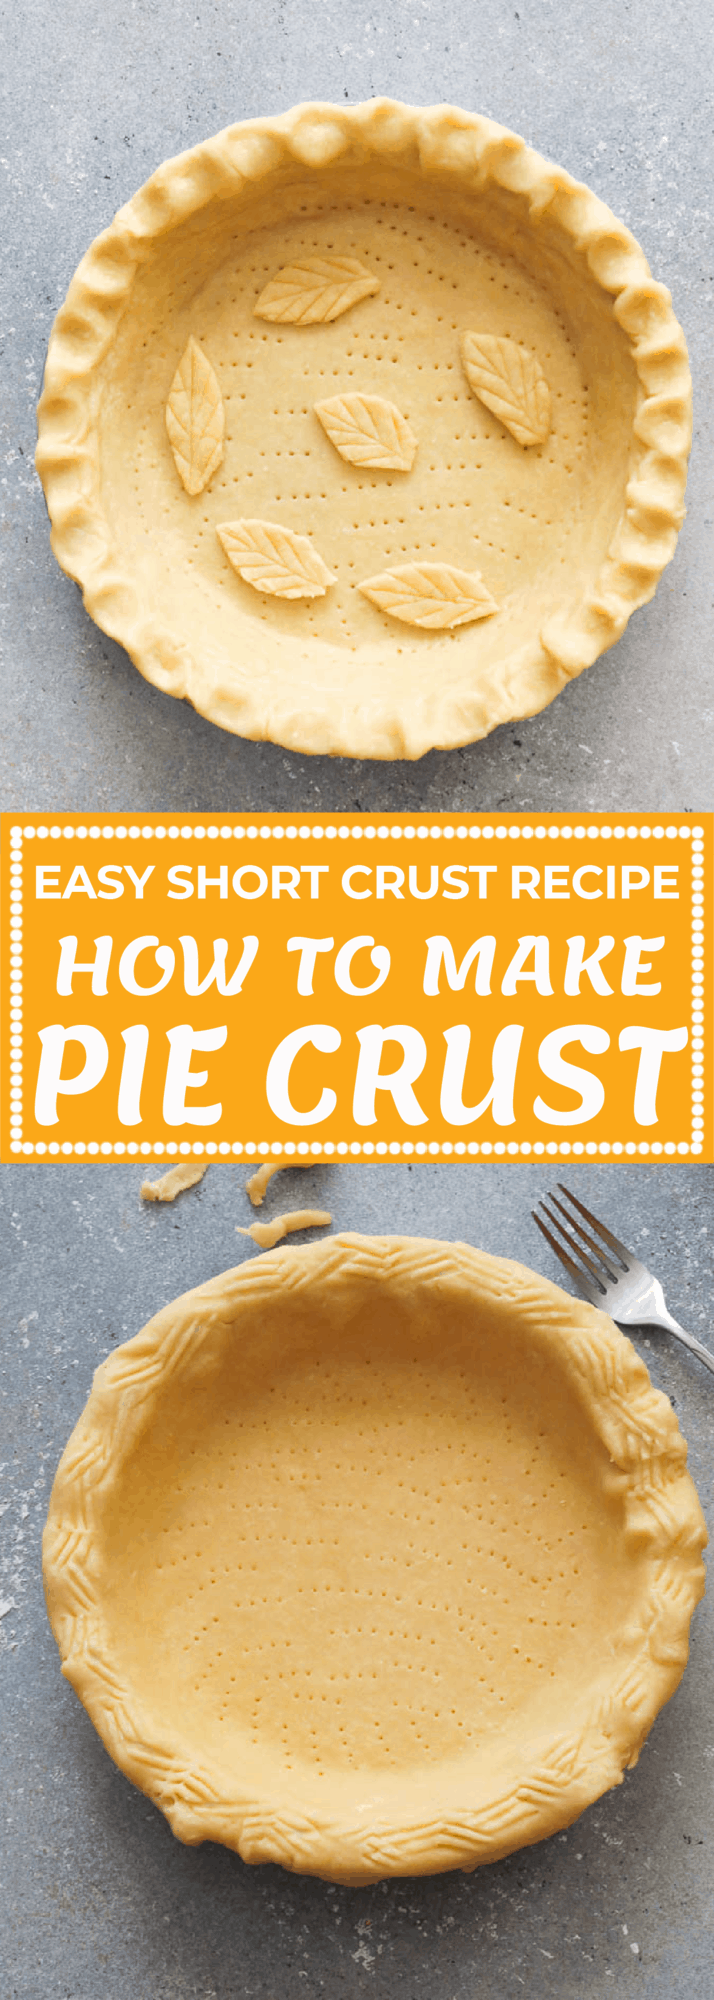 HOW TO MAKE PIE CRUST